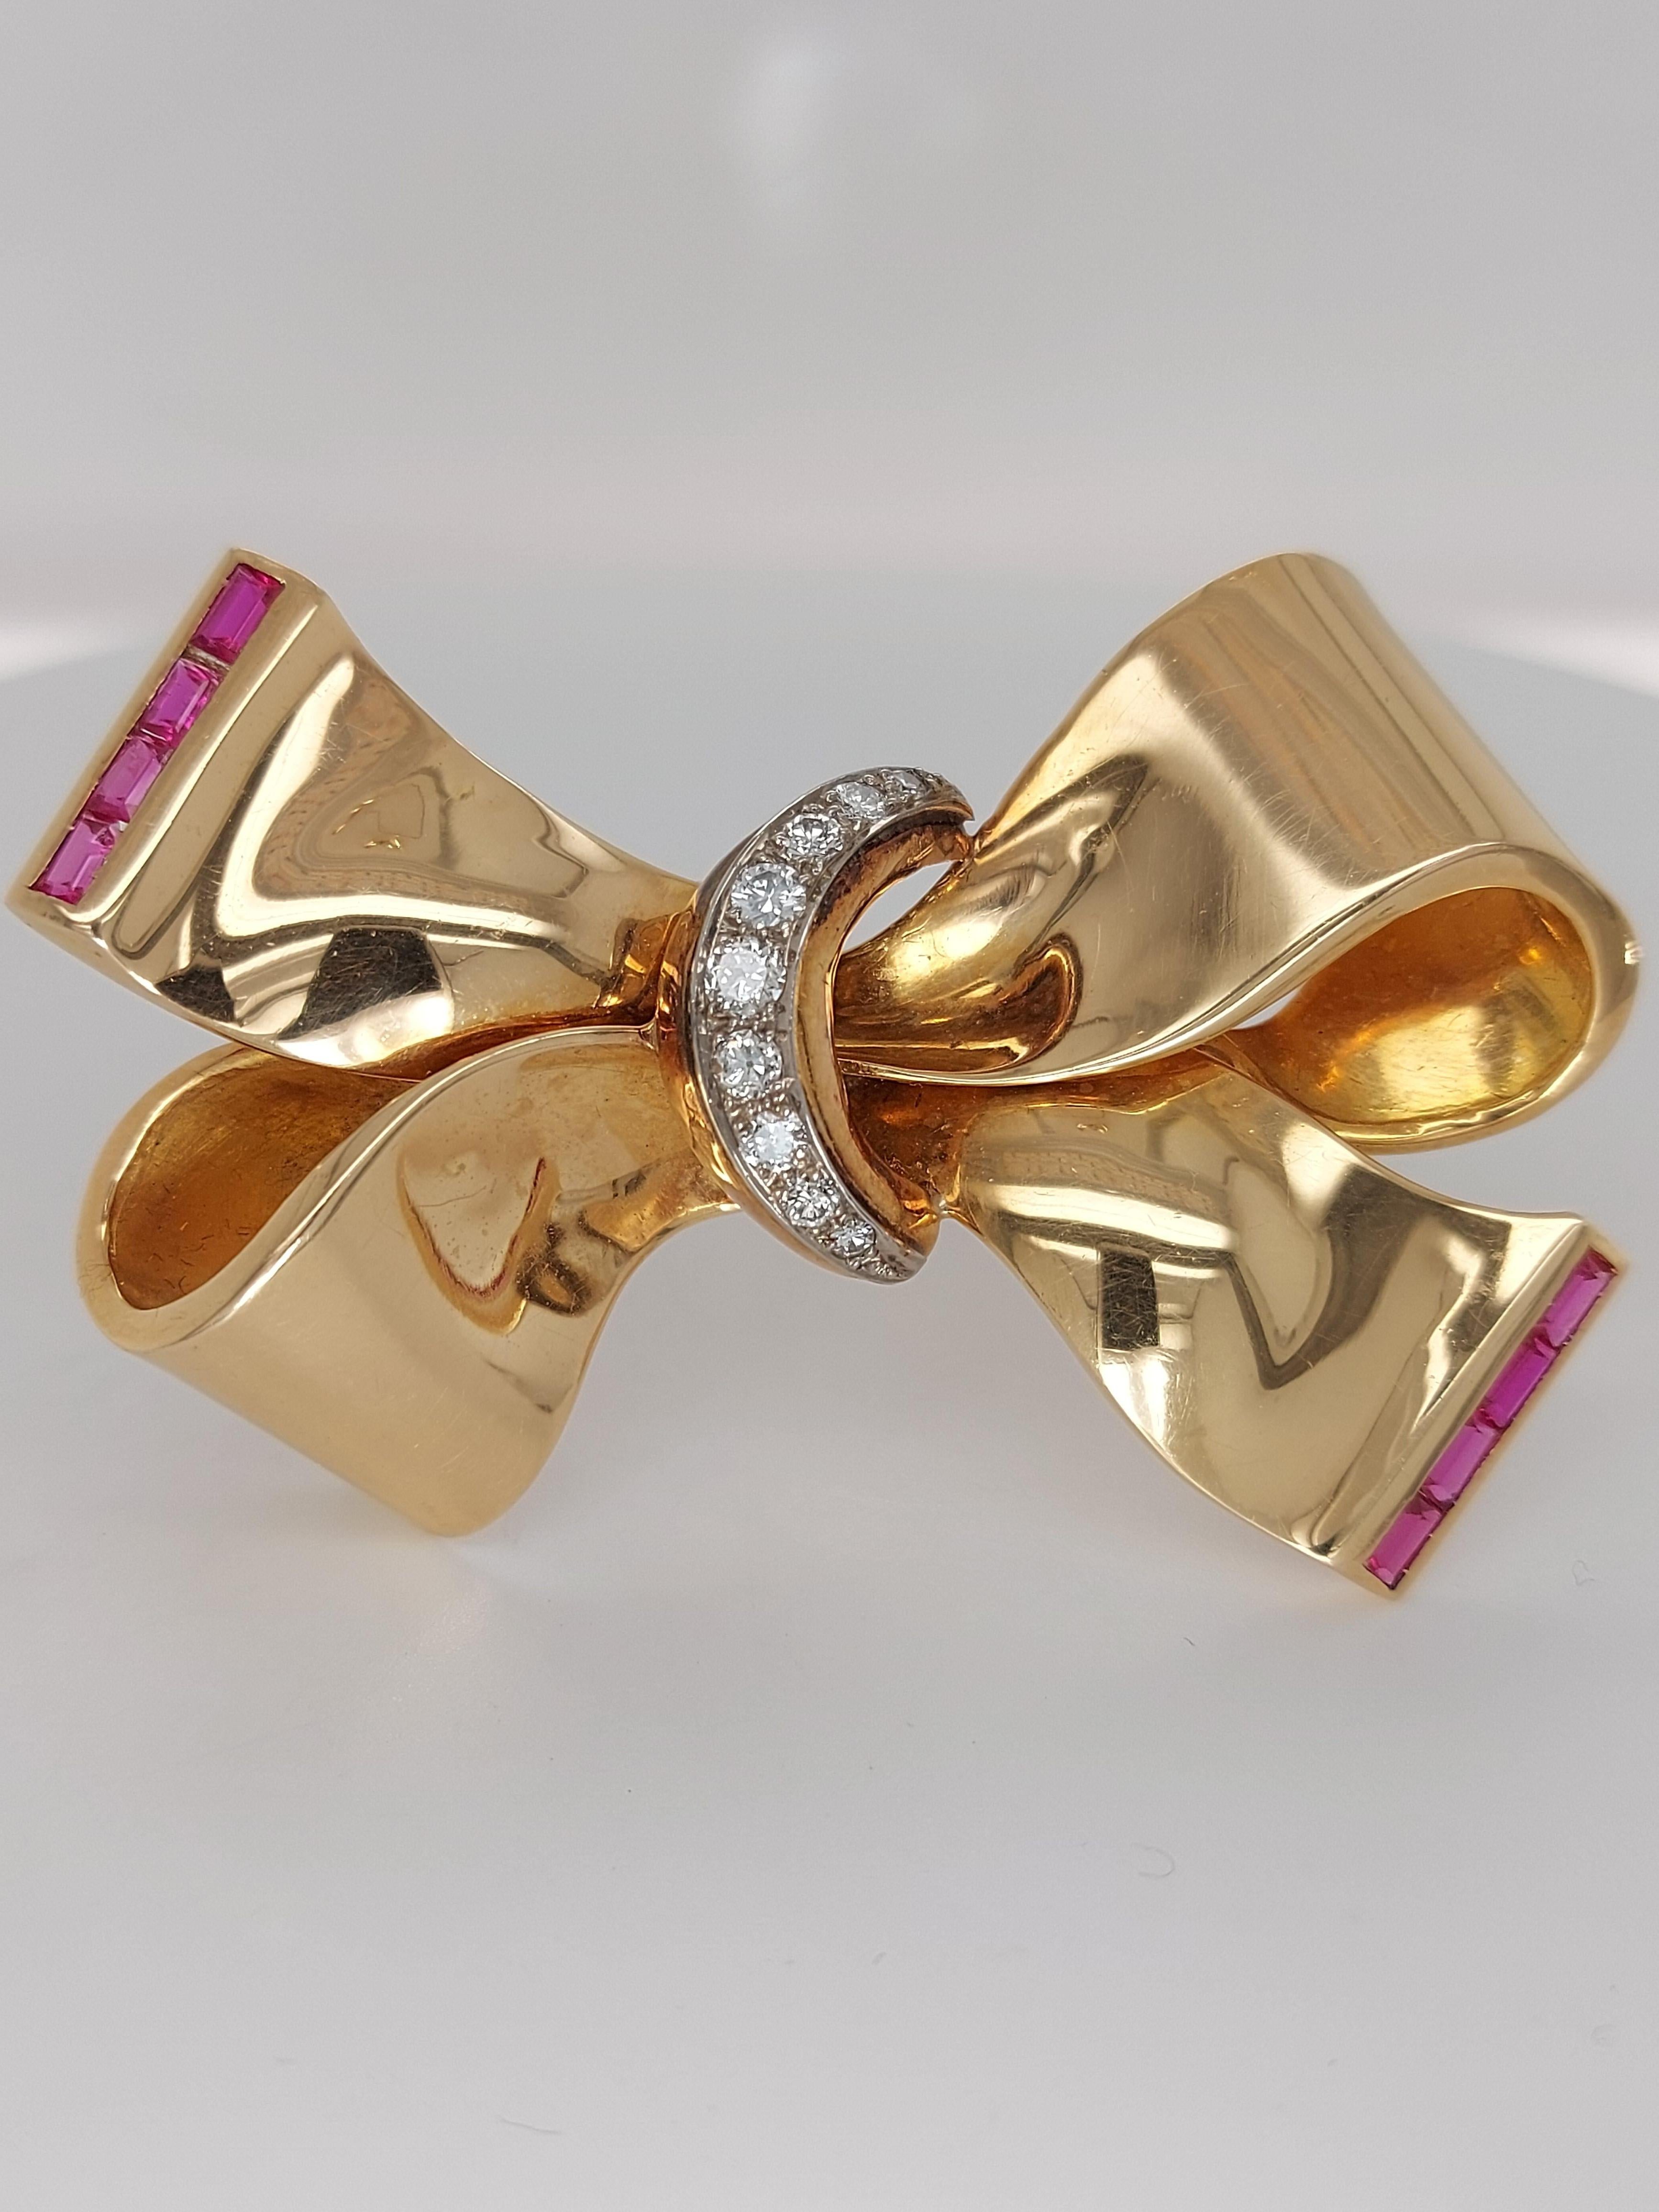 Brilliant Cut 18 Karat Shiny Yellow Gold Bow / Ribbon Brooch Set with Diamonds and Rubies For Sale